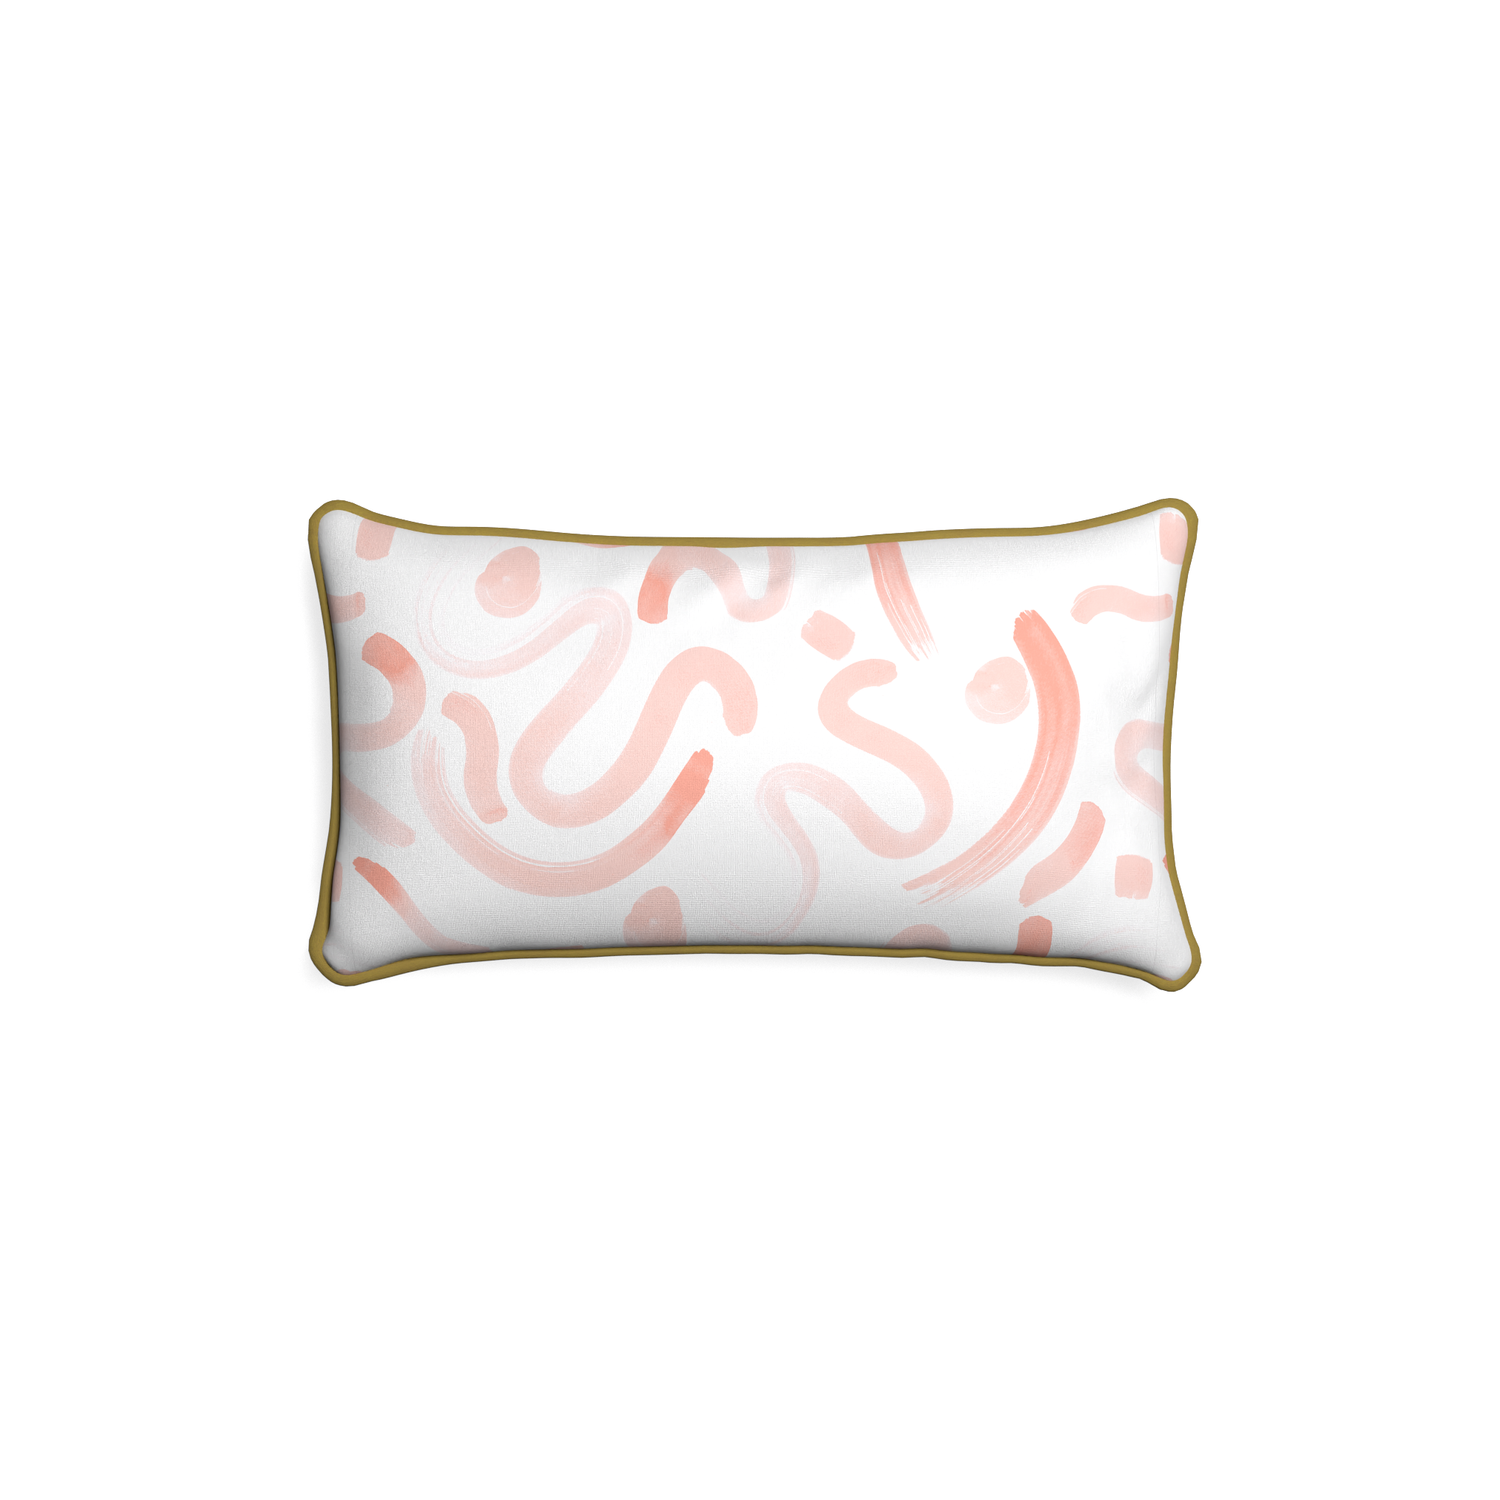 Petite-lumbar hockney pink custom pink graphicpillow with c piping on white background